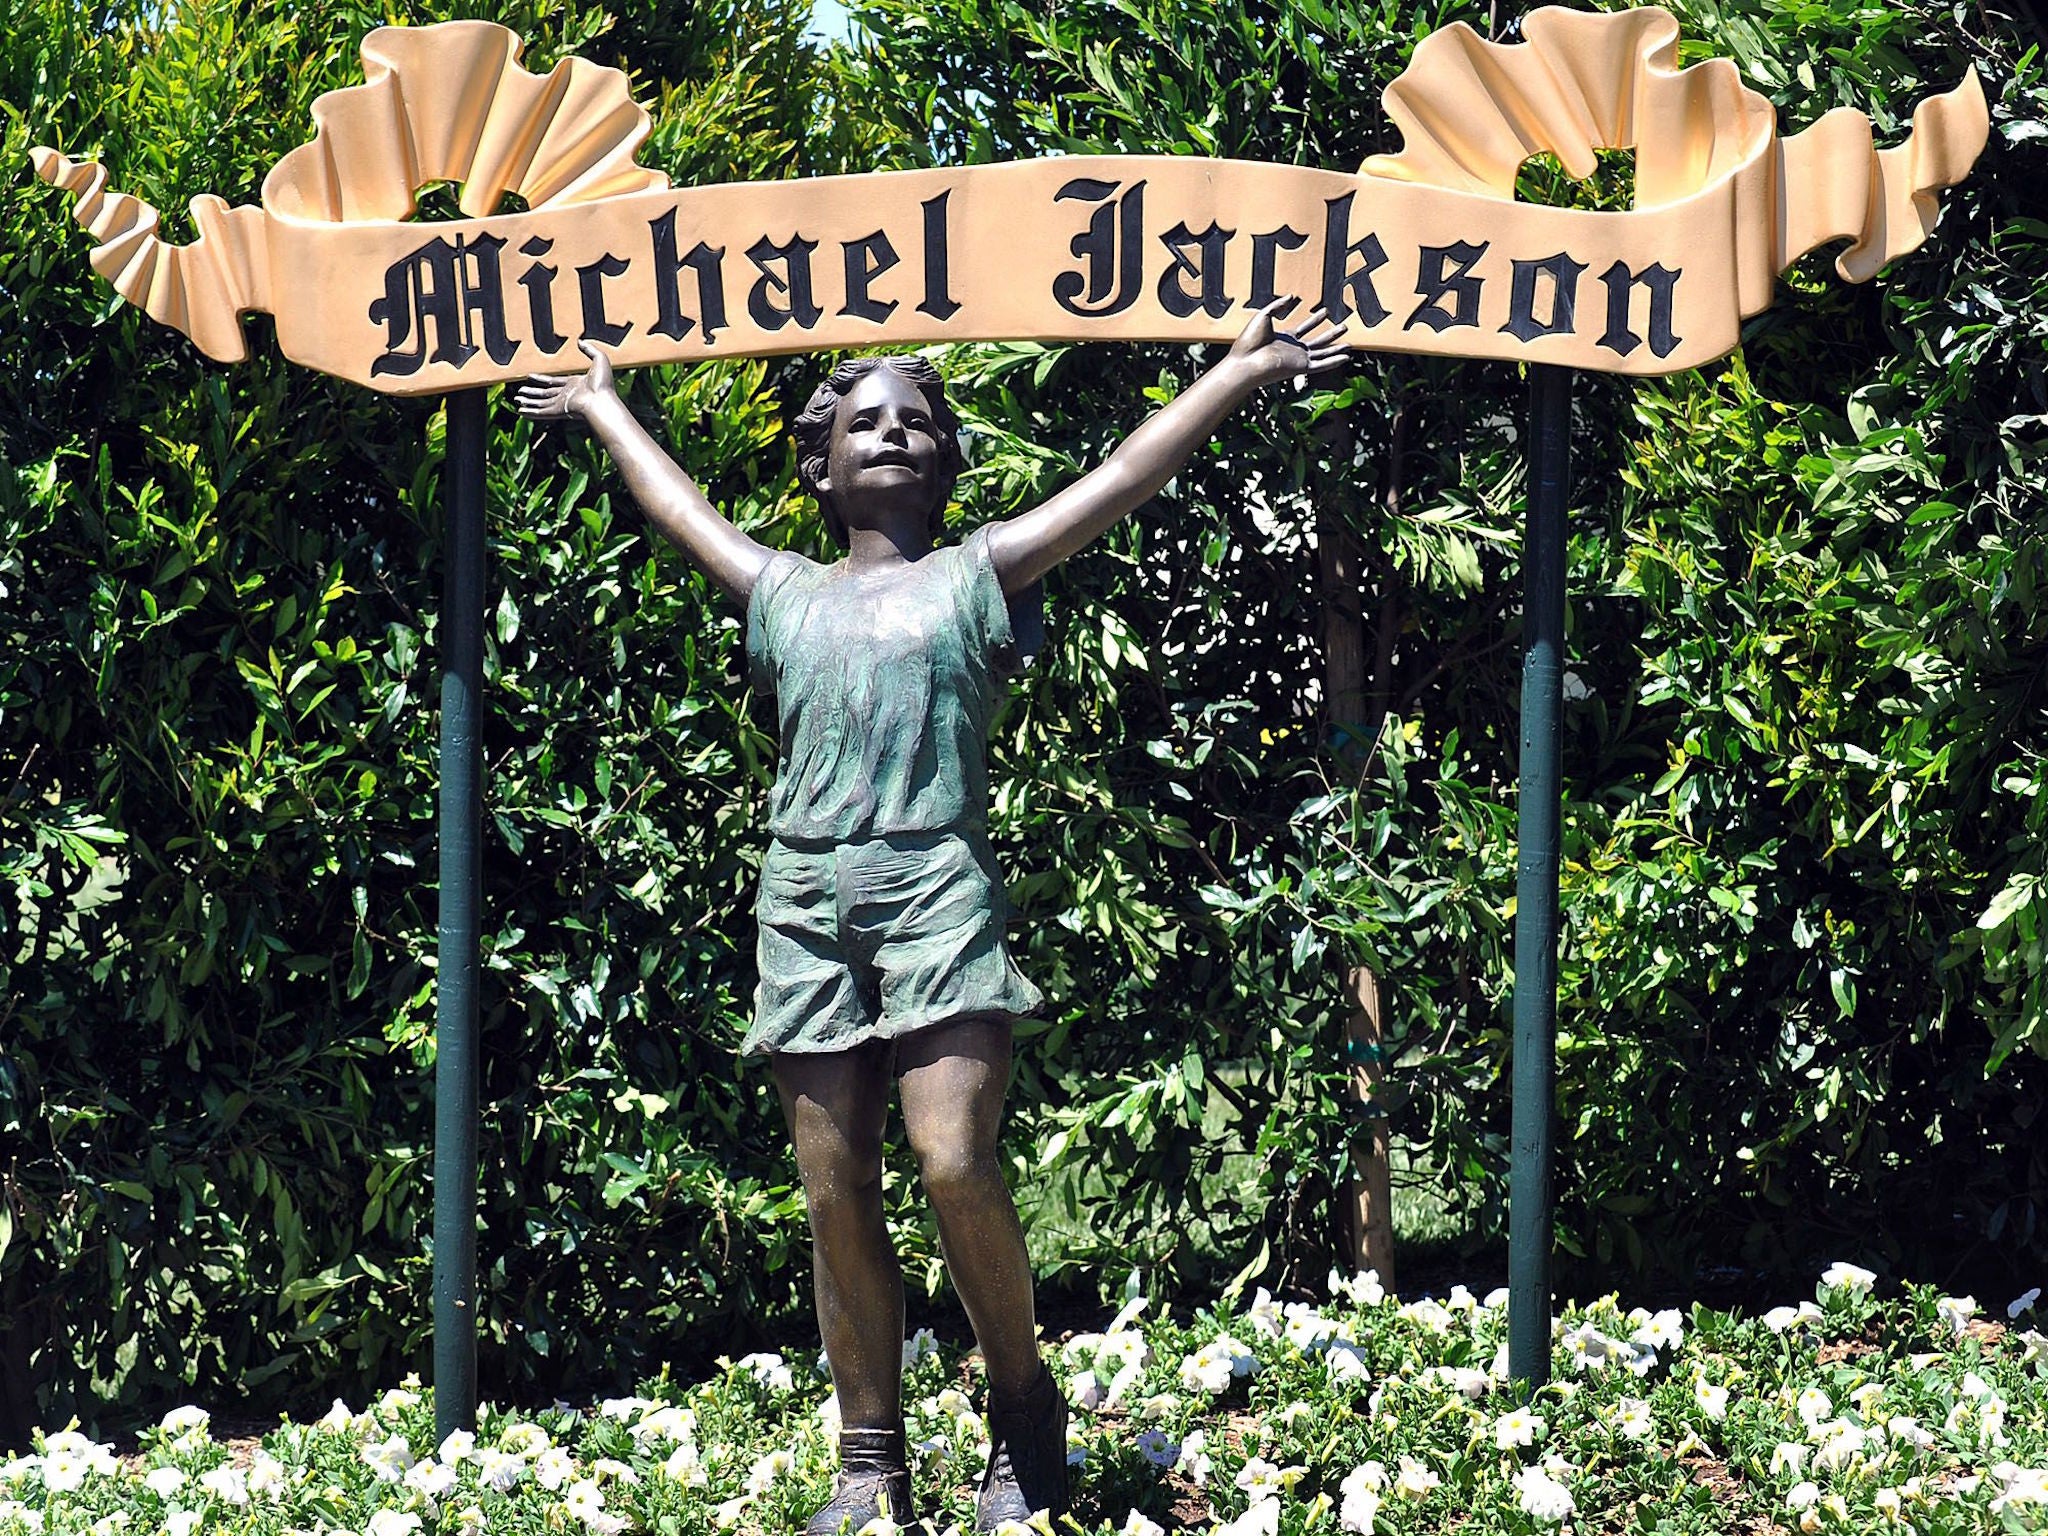 One of two welcome signs that marked the entrance to the ranch, which Jackson named for the fantasy world inhabited by Peter Pan, the boy who never grew up